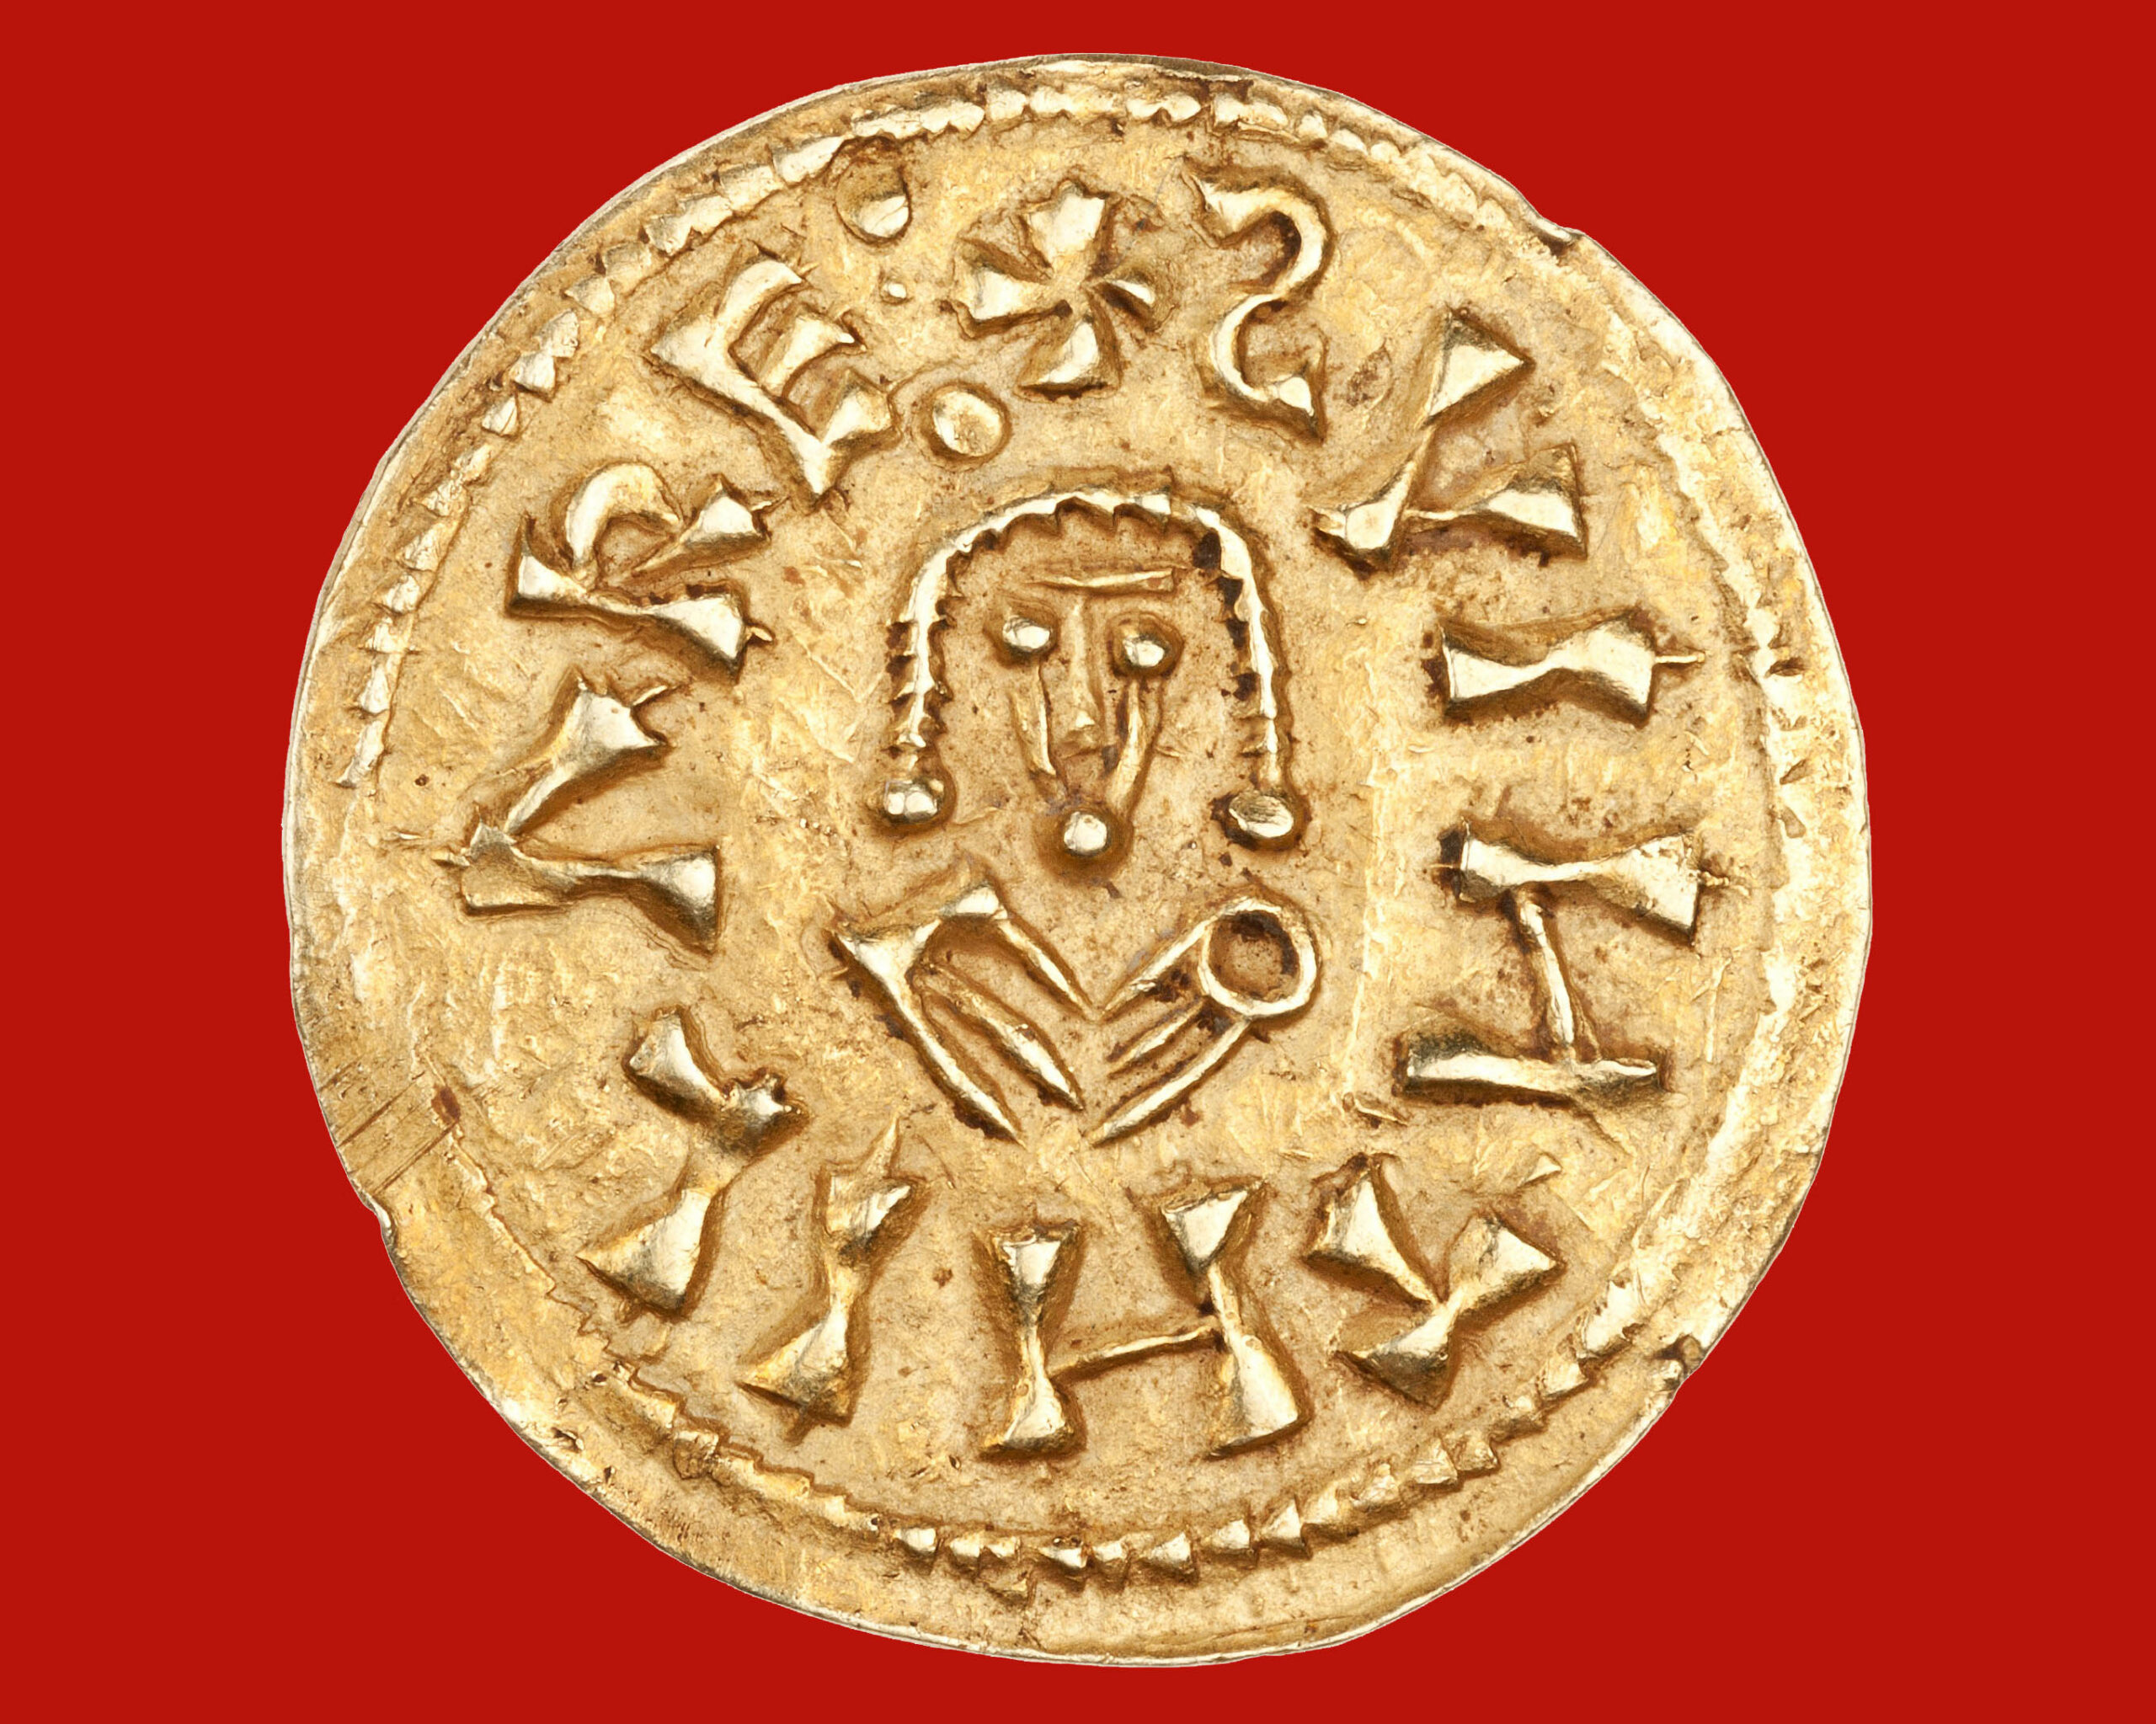 Coinage and Economy of the Early Medieval Mediterranean